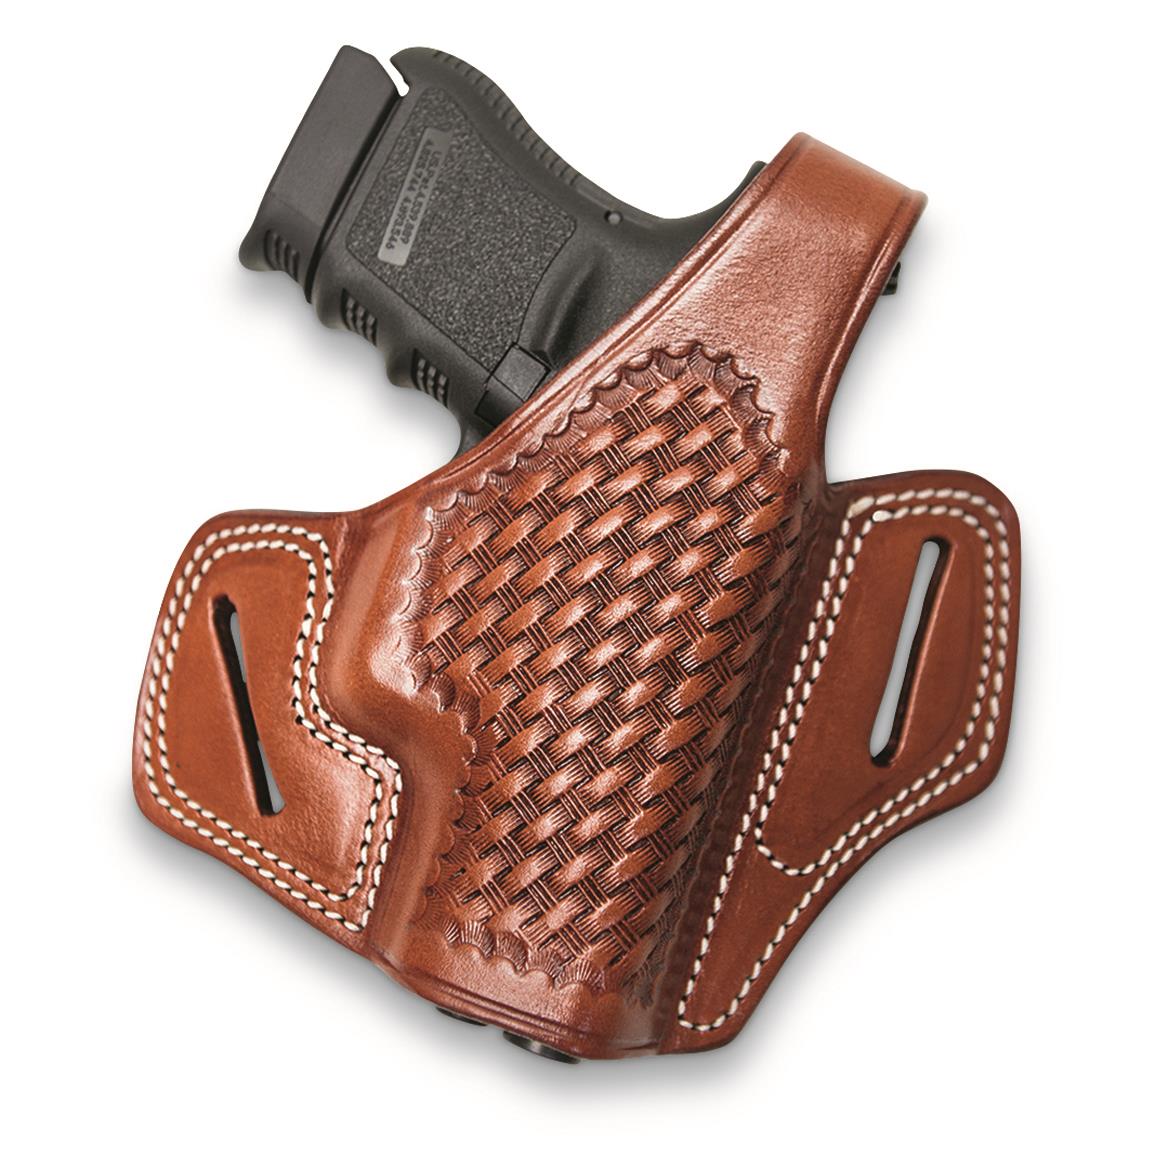 Cebeci Arms Leather Basketweave Pancake Holster, SIG SAUER P320, Right Hand